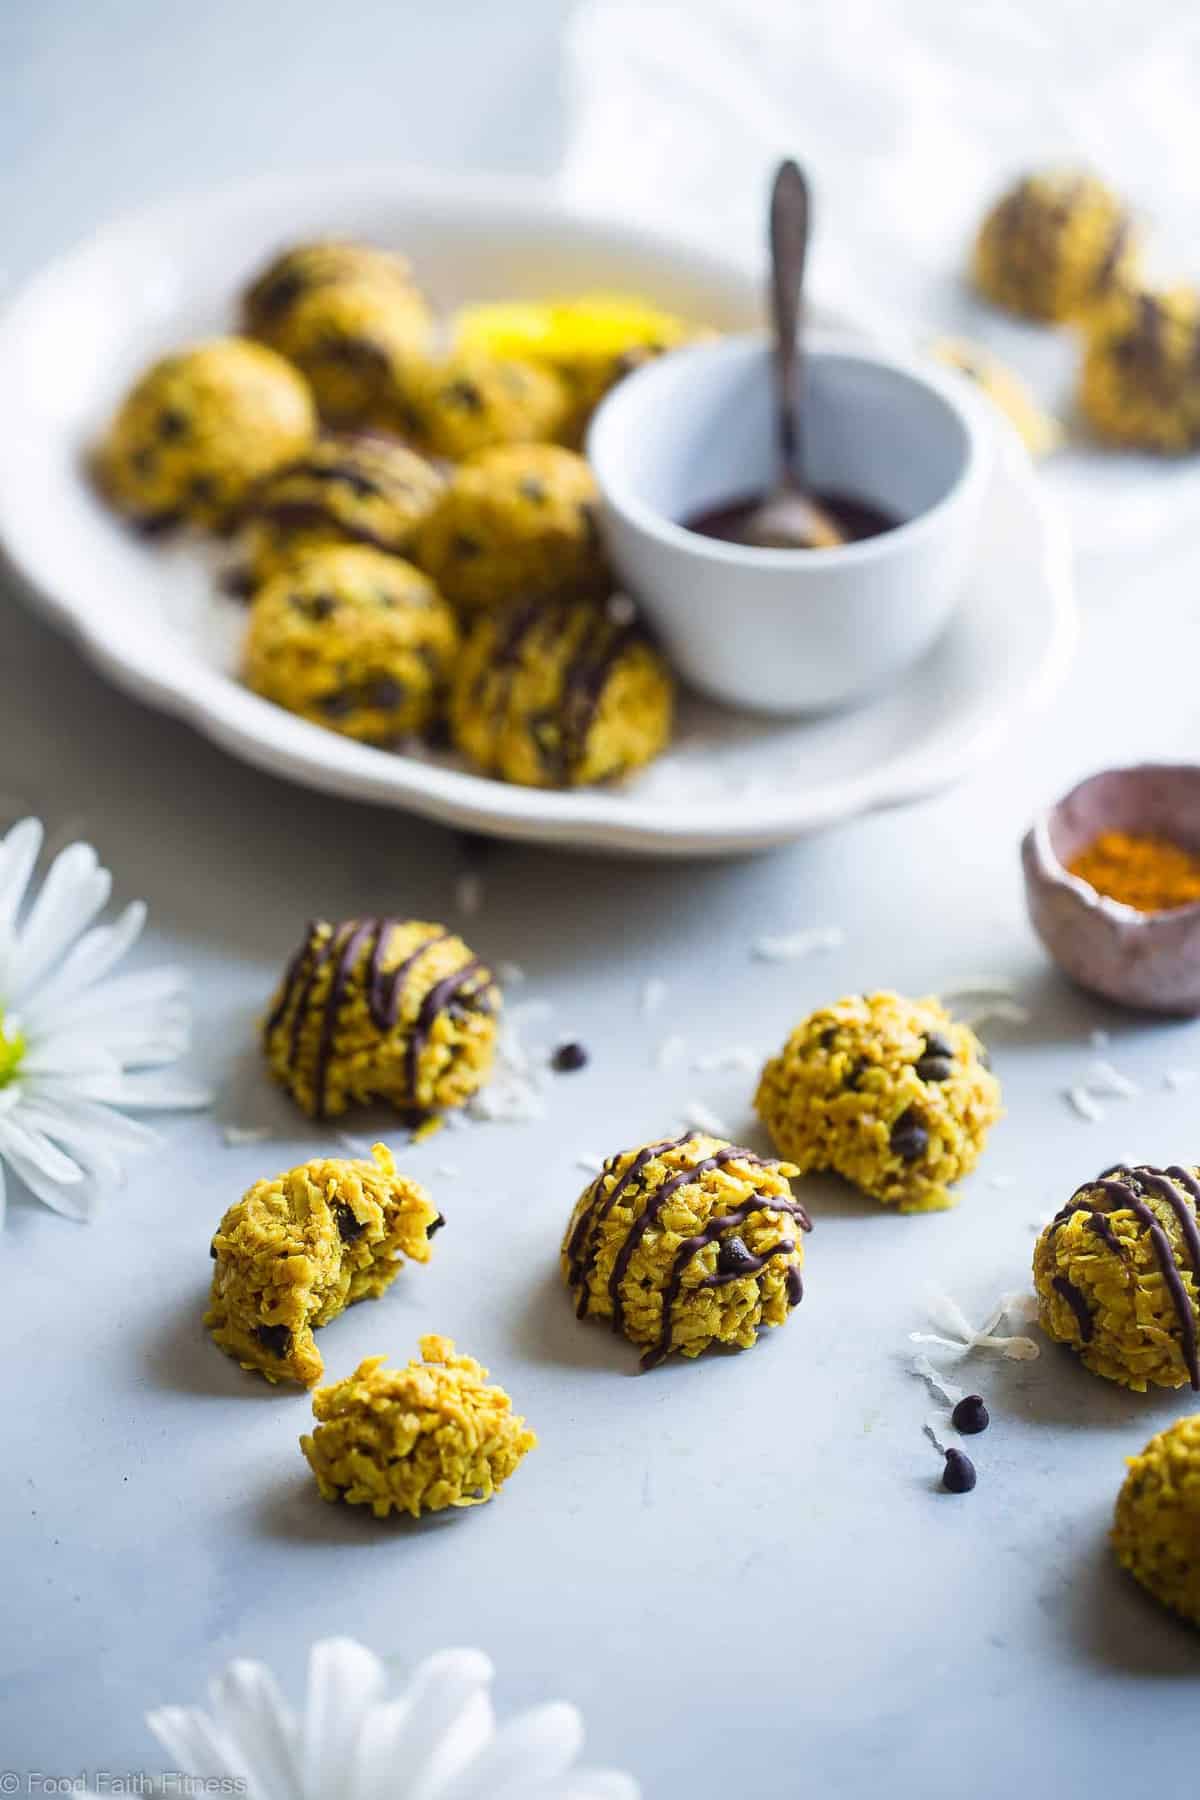 Healthy No Bake Cookies with Coconut Oil -  These easy, 6 ingredient cookies have addicting spicy-sweet flavors from turmeric, almond butter and chocolate chips! They're a paleo, vegan and gluten free treat that is secretly anti-inflammatory! | #Foodfaithfitness | #Paleo #Vegan #Glutenfree #Dairyfree #Healthy